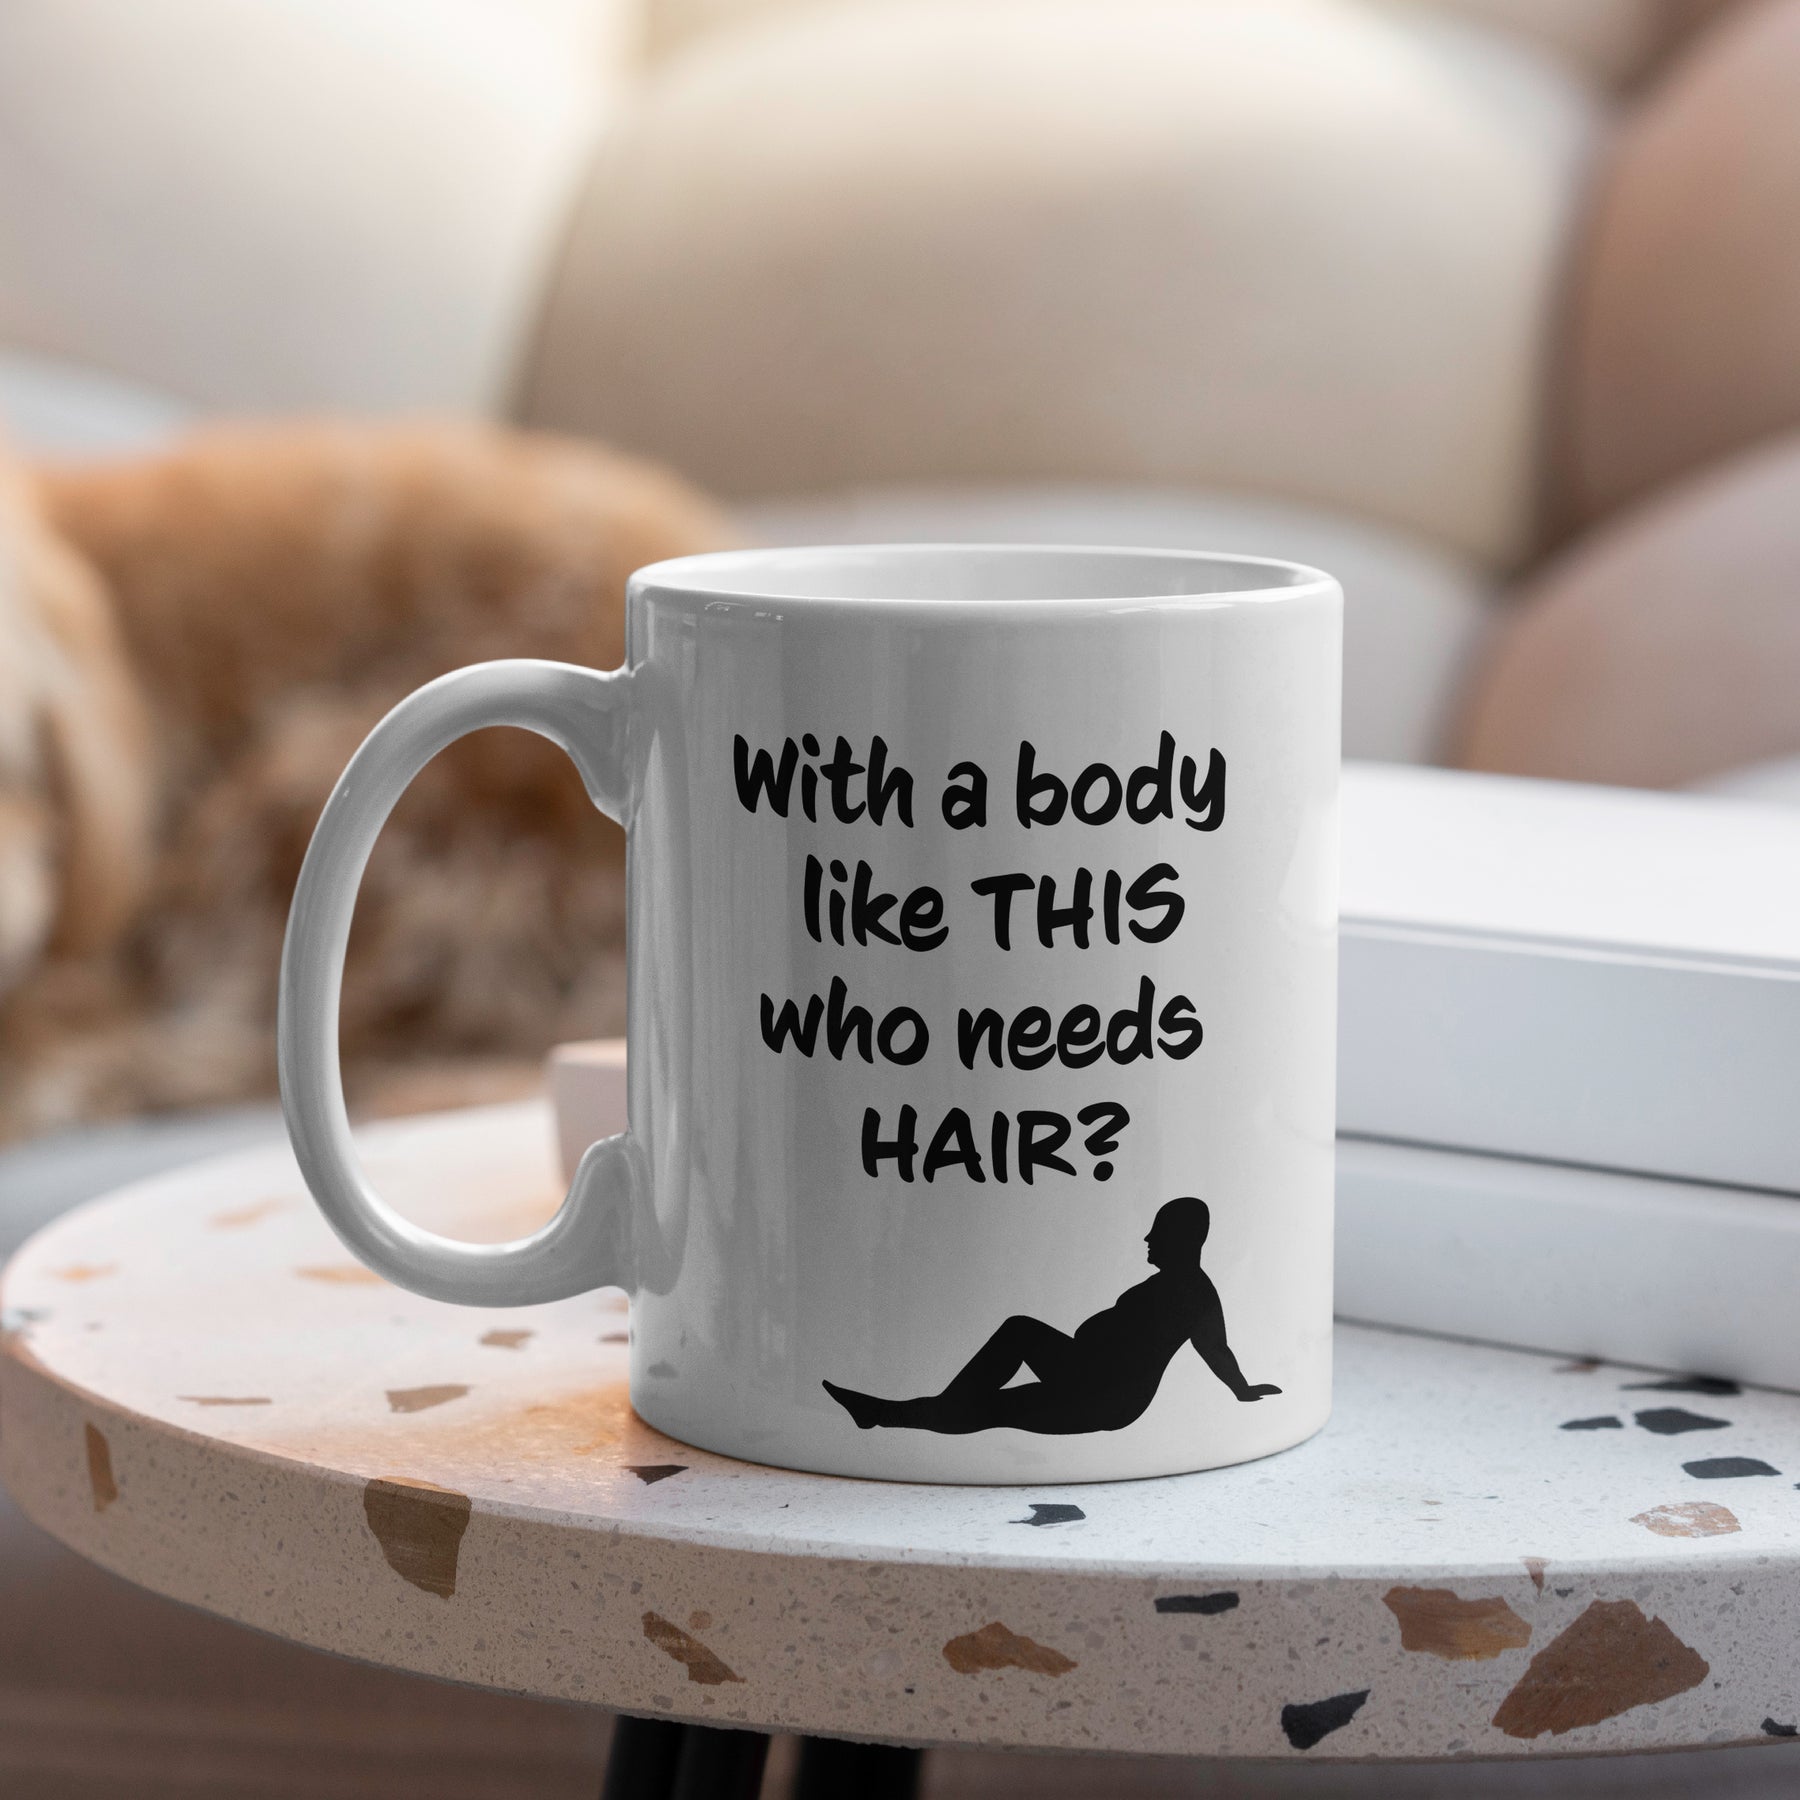 "With A Body Like This" Large 15oz Mug - Funny Gift for Dad